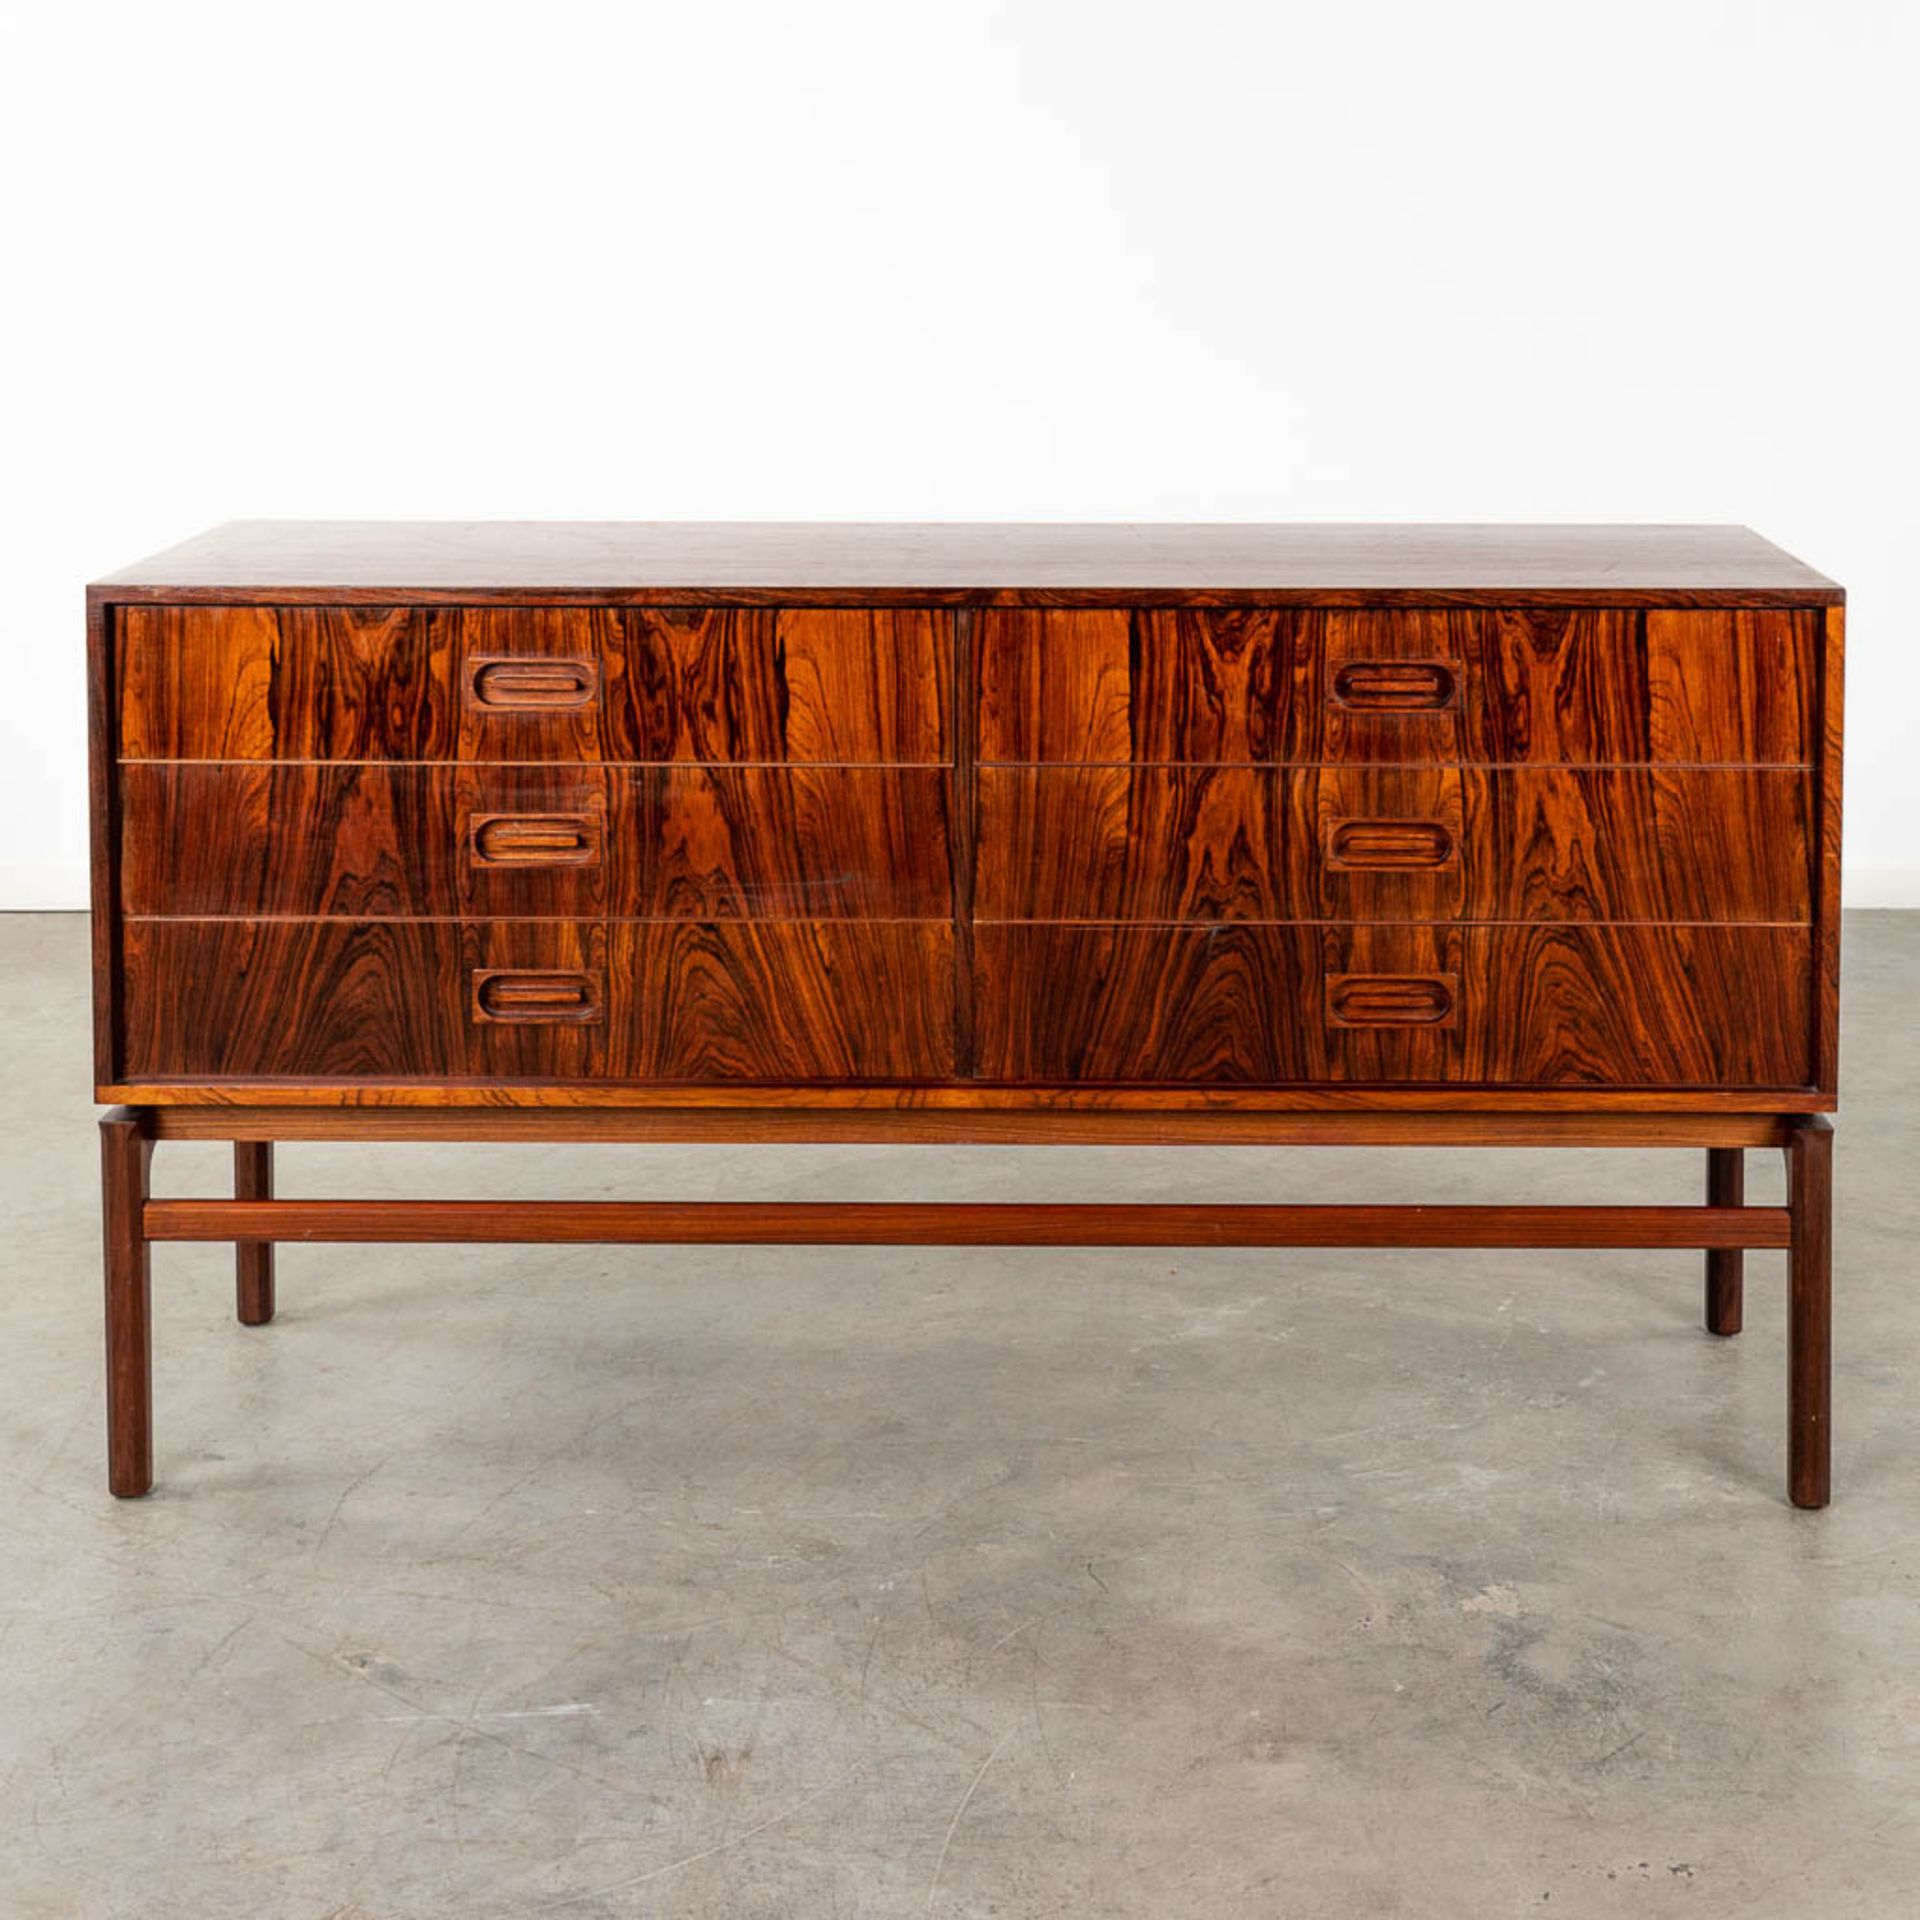 A mid-century Scandinavian Sideboard with 6 drawers, and rosewood veneer. (D:45 x W:150 x H:80 cm) - Image 4 of 12